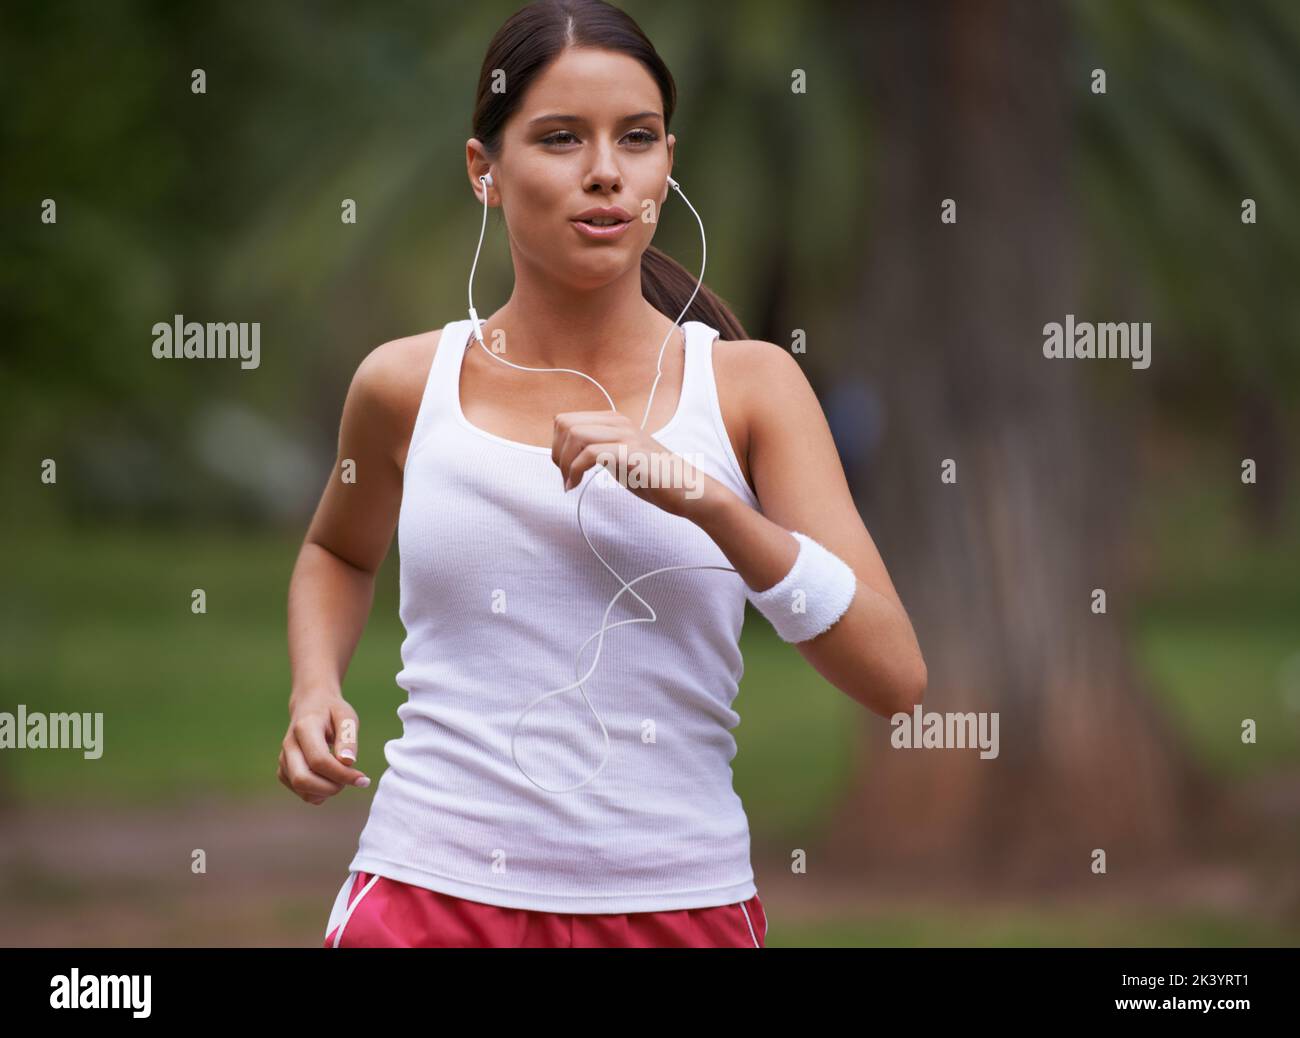 My music helps me keep the pace. A beautiful young woman jogging through a park wearing earphones. Stock Photo